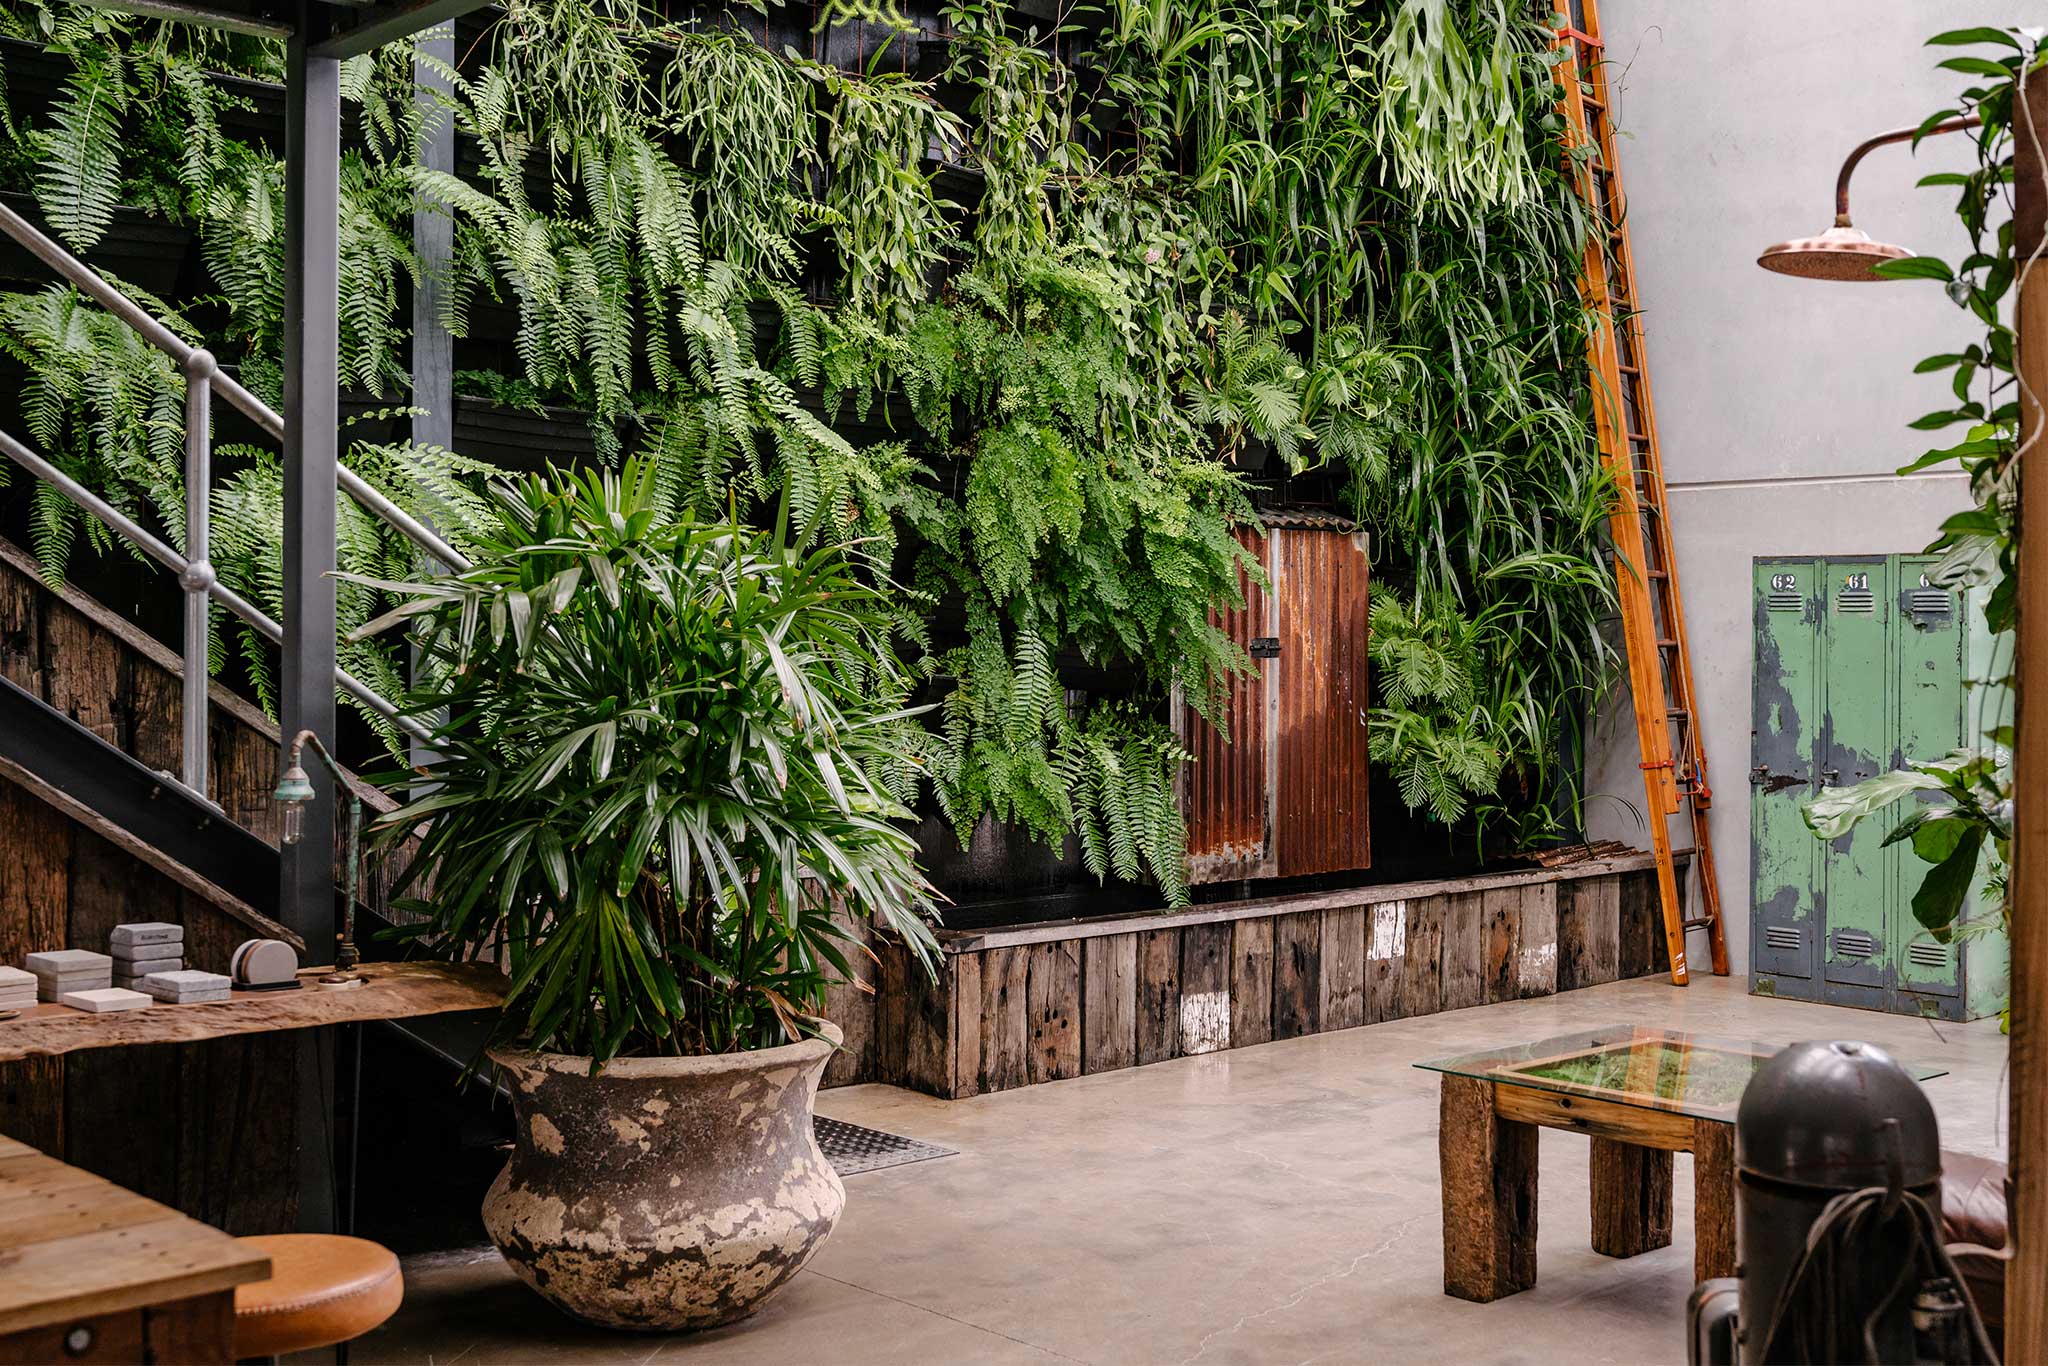 Commercial Interior Fitout Central Coast - Project "MBS Warehouse Jungle" - plant wall with moss art coffee table and custom outdoor shower in foreground